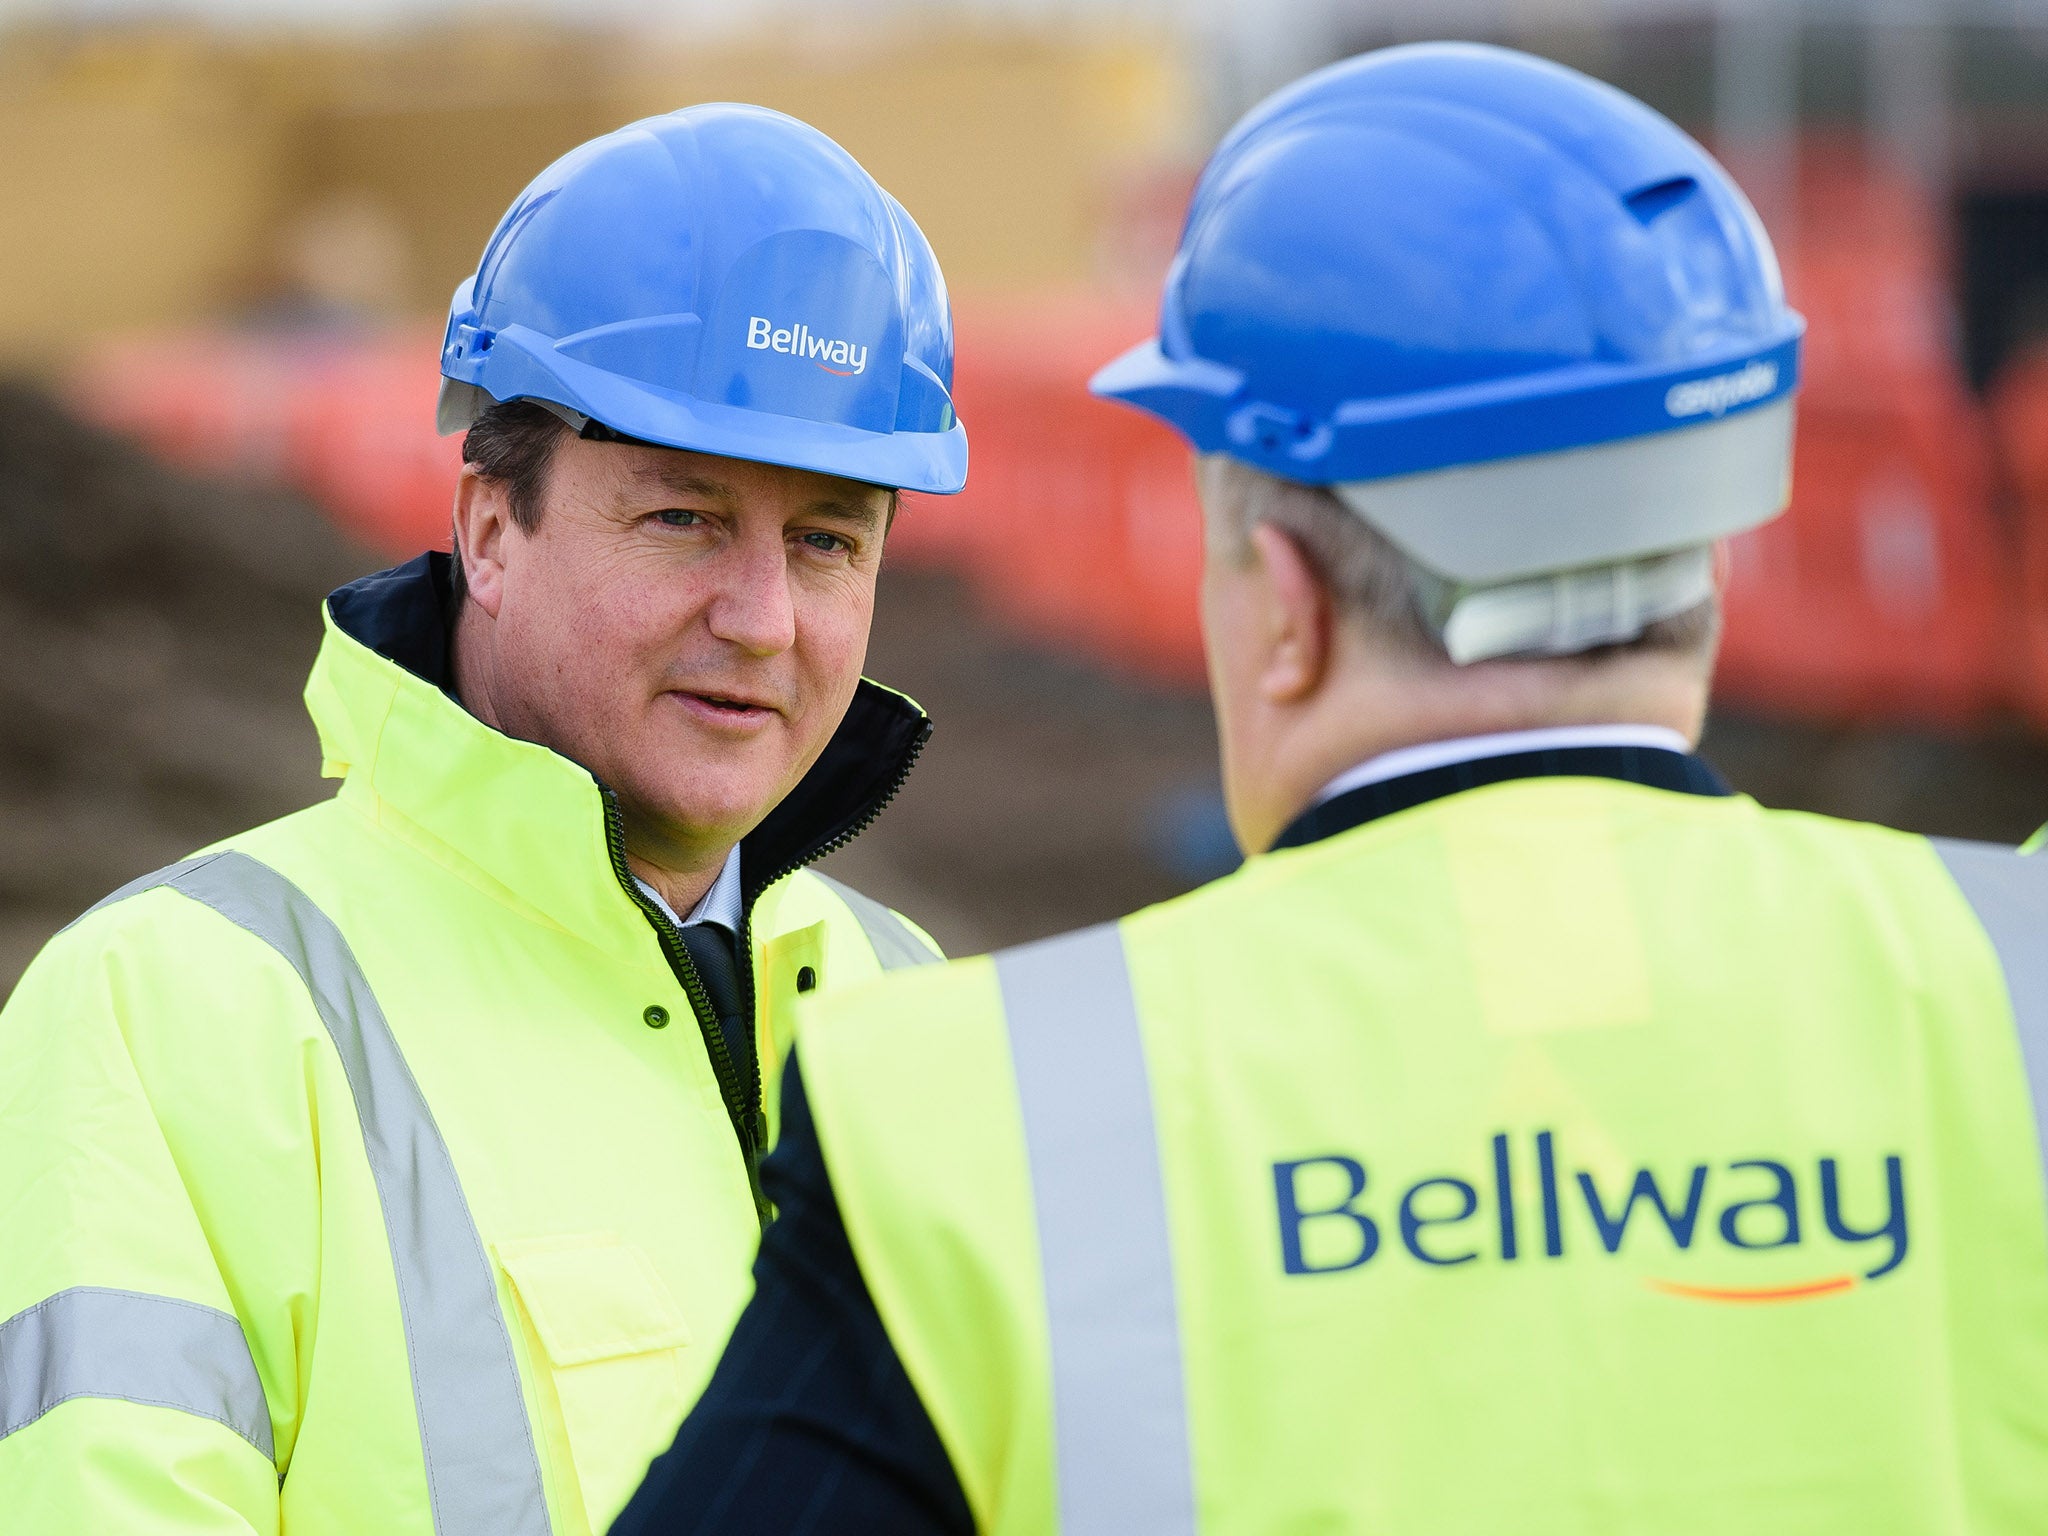 An average of 123,560 houses were built in England and Wales under Mr Cameron